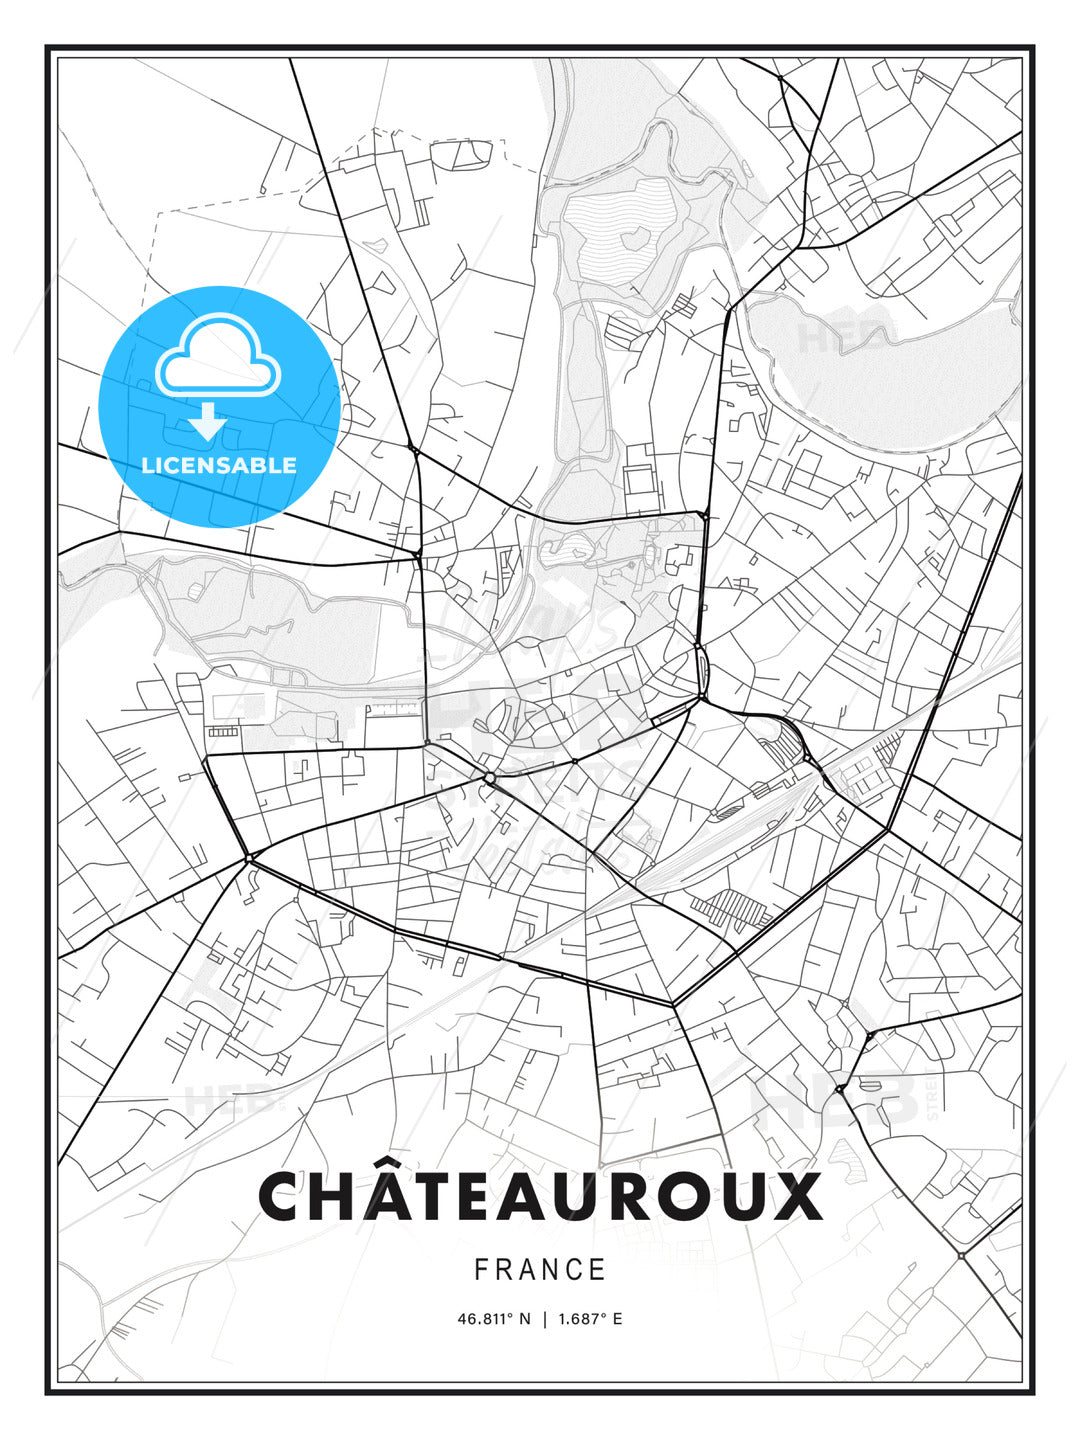 Châteauroux, France, Modern Print Template in Various Formats - HEBSTREITS Sketches